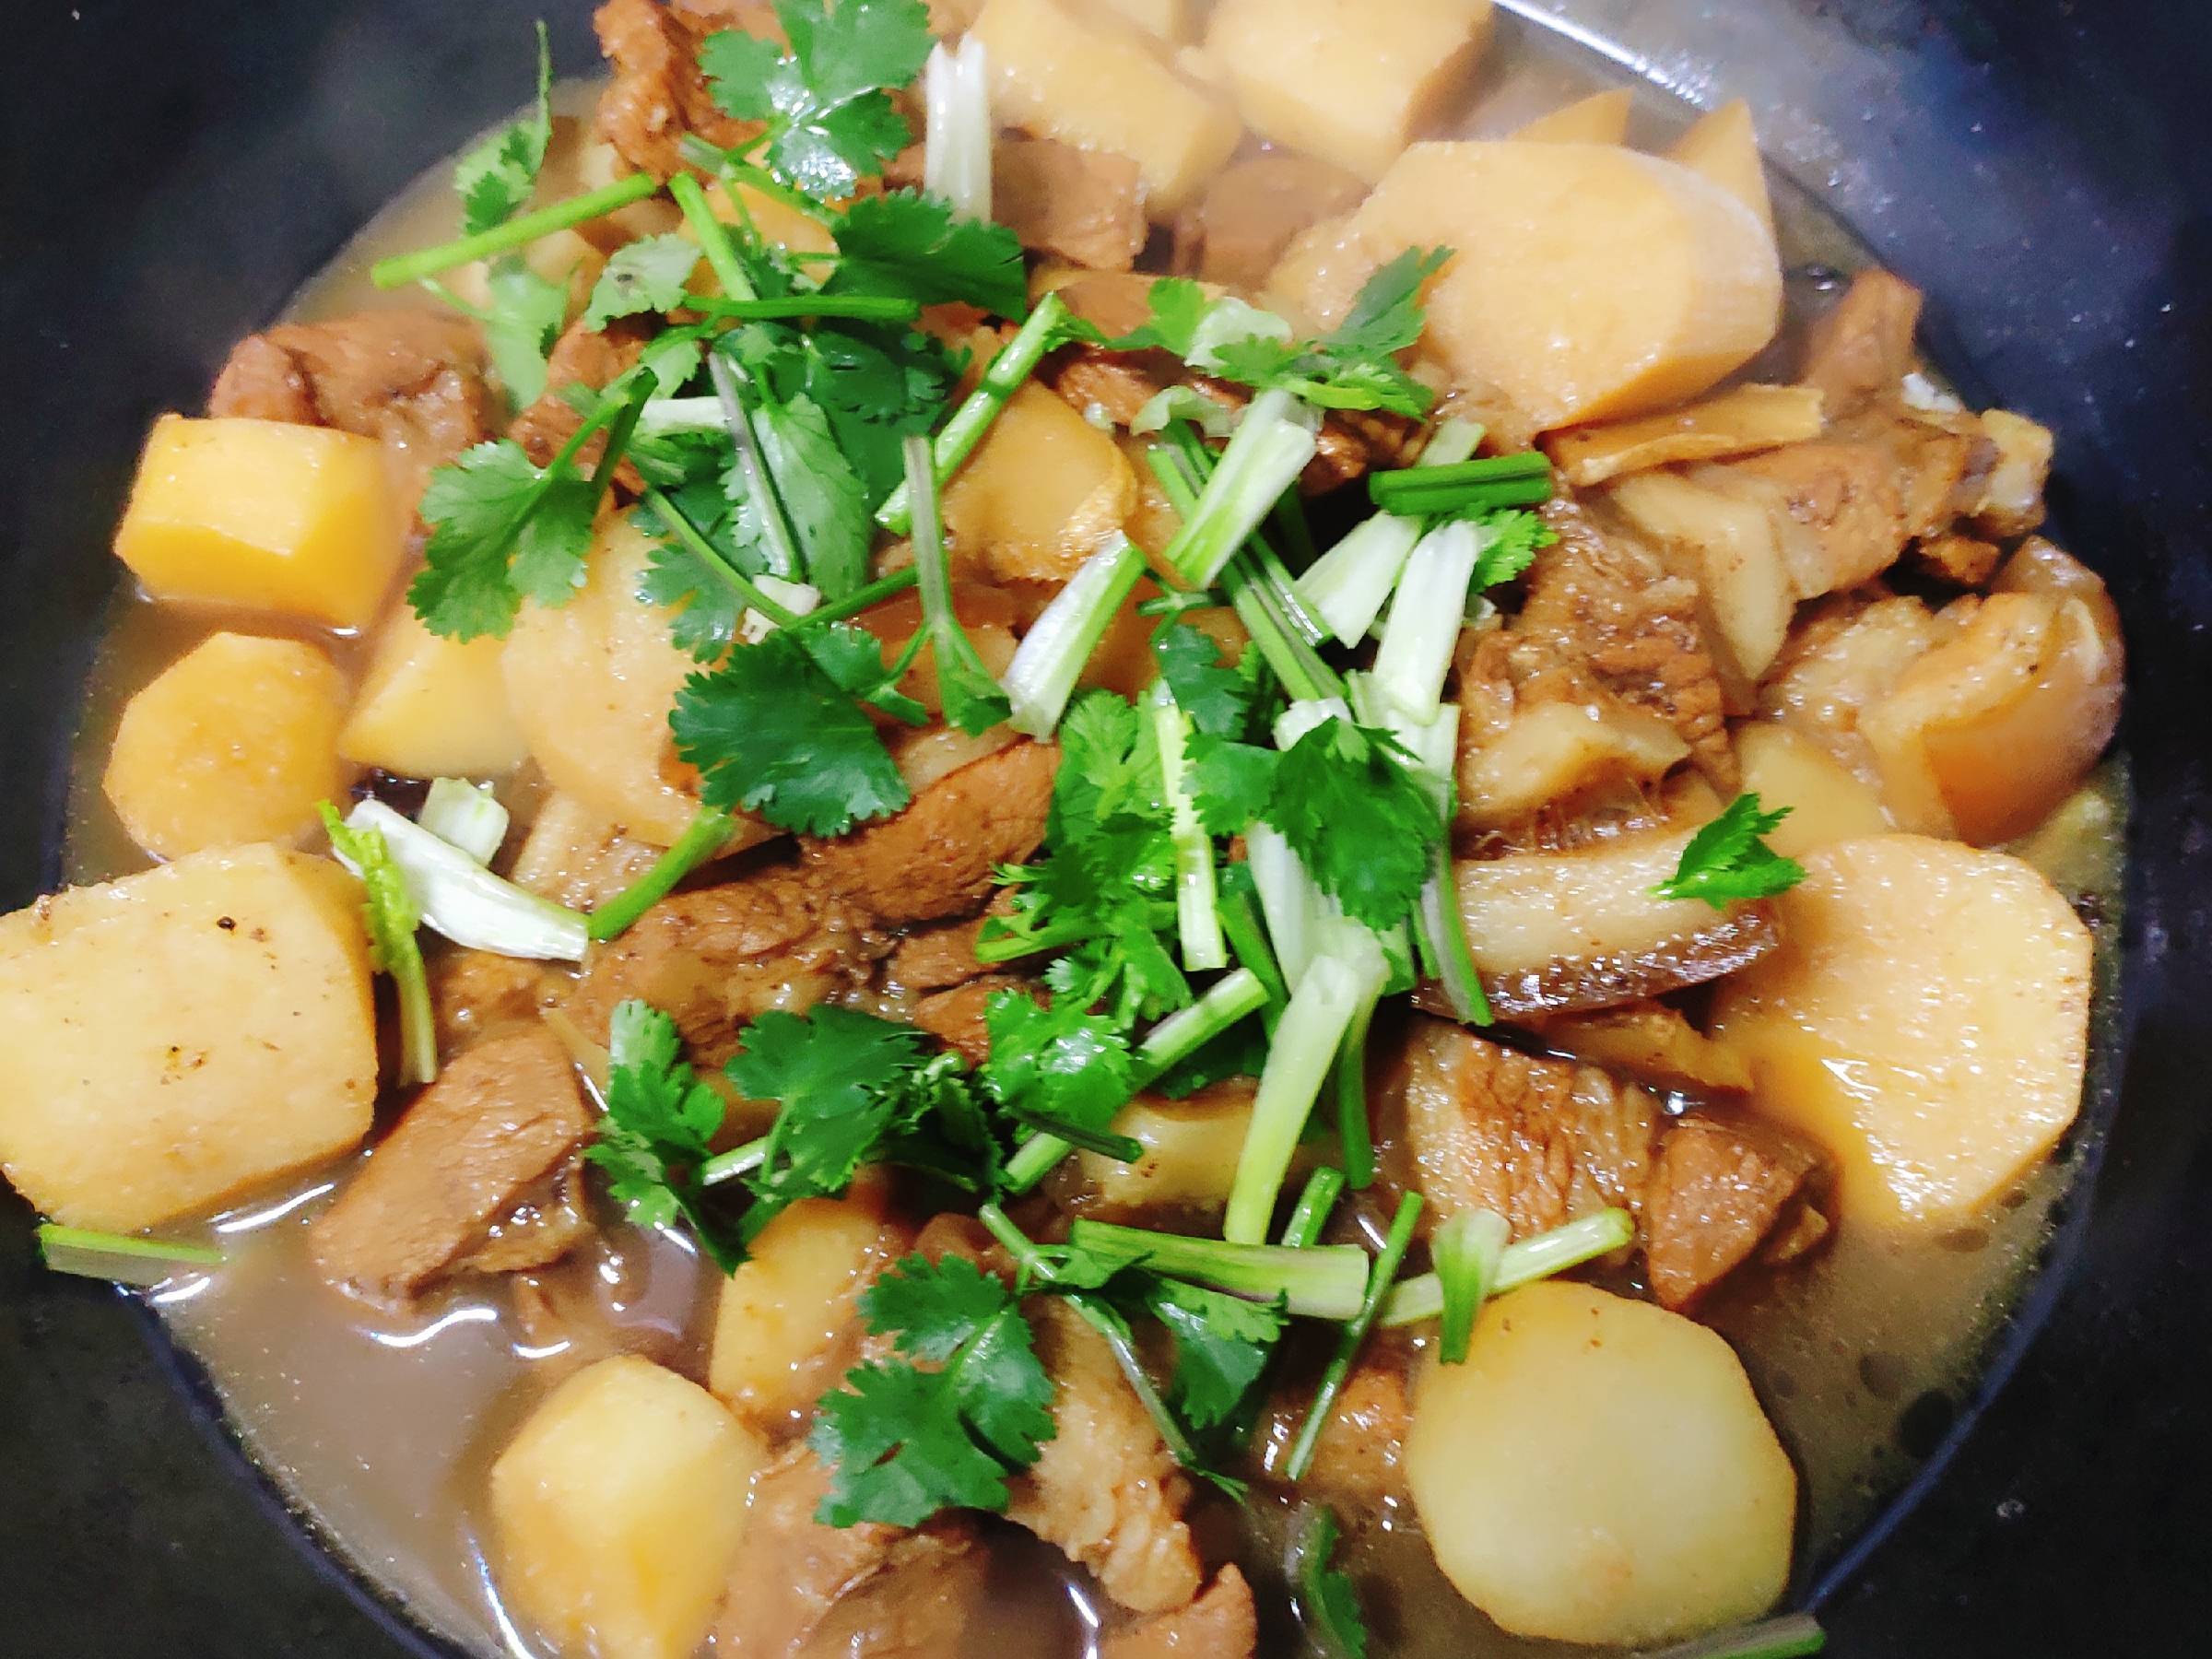 Stewed Yam with Braised Pork without A Drop of Oil recipe